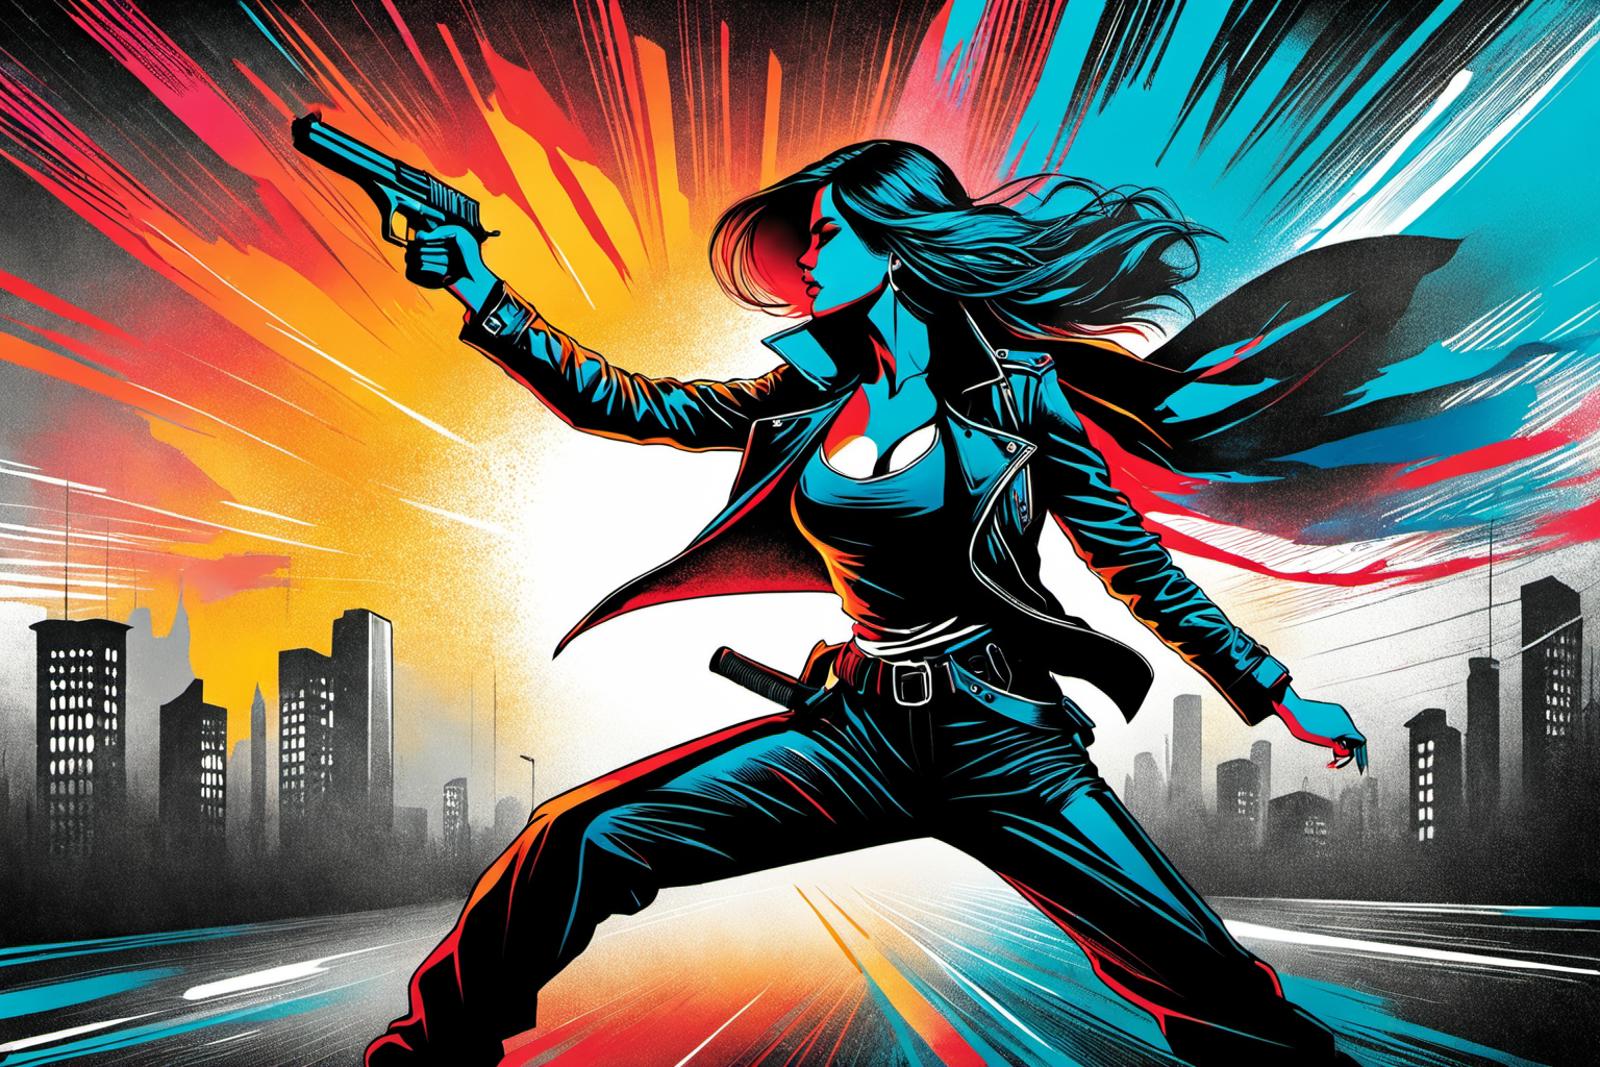 A beautifully drawn woman in a leather jacket holding a gun.